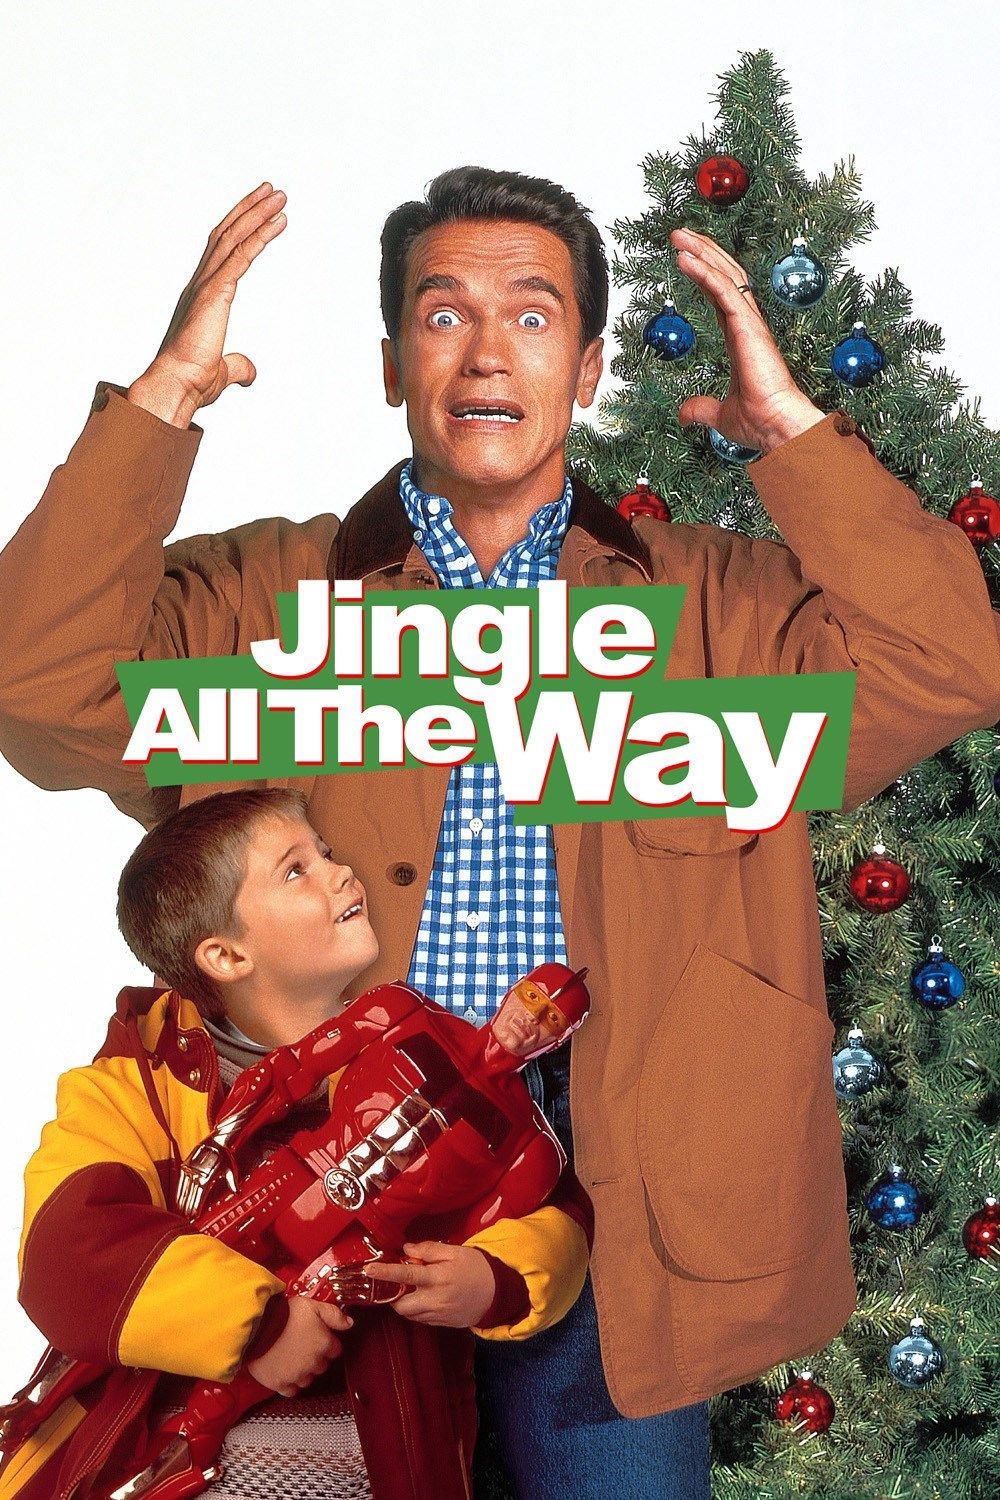 Jingle All The Way wallpaper, Movie, HQ Jingle All The Way pictureK Wallpaper 2019